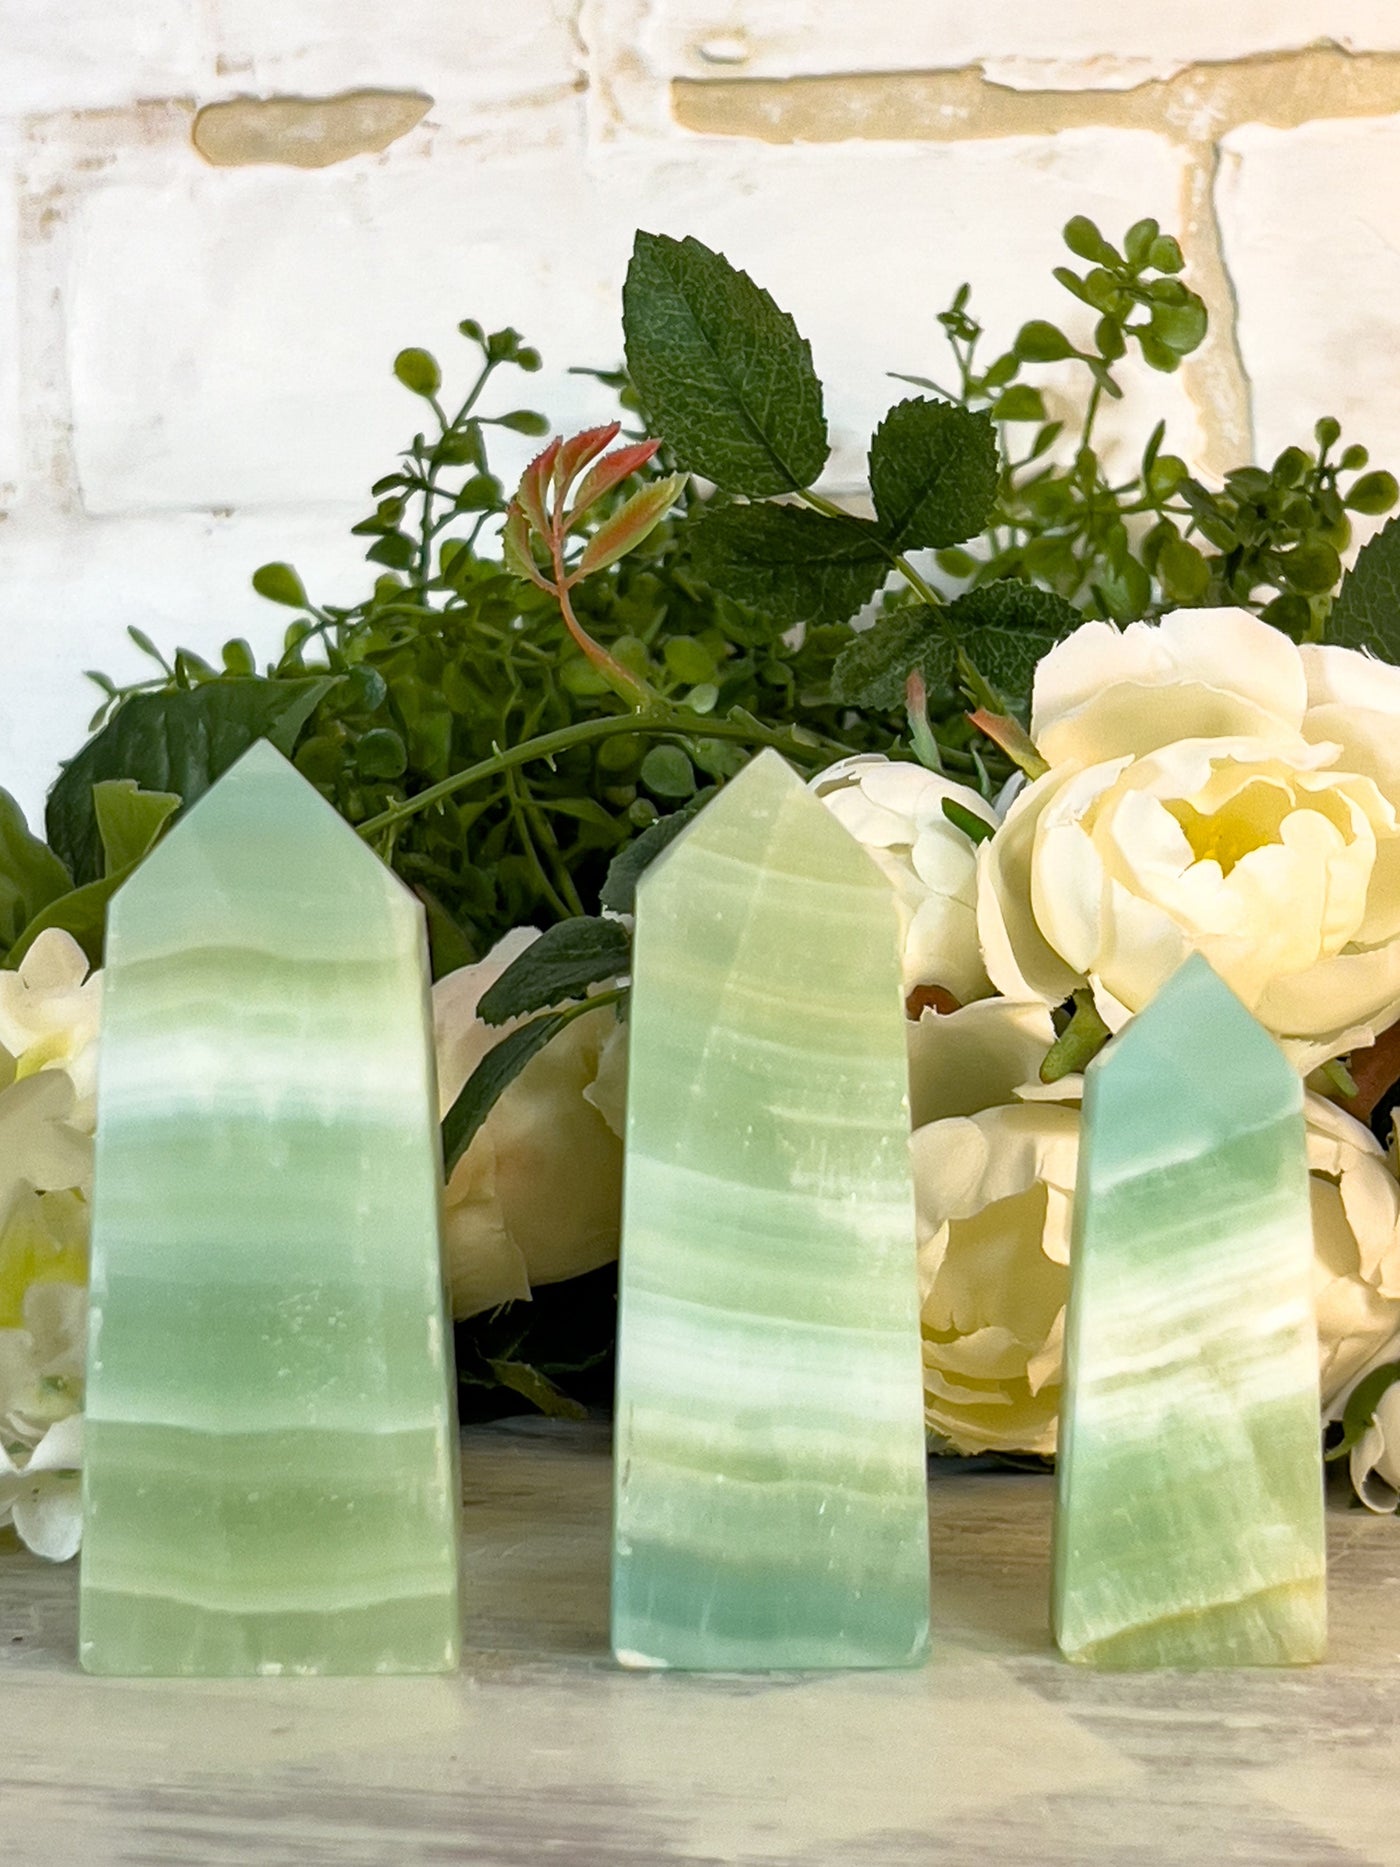 PISTACHIO CALCITE POINTS Revive In Style Vintage Furniture Painted Refinished Redesign Beautiful One of a Kind Artistic Antique Unique Home Decor Interior Design French Country Shabby Chic Cottage Farmhouse Grandmillenial Coastal Chalk Paint Metallic Glam Eclectic Quality Dovetailed Rustic Furniture Painter Pinterest Bedroom Living Room Entryway Kitchen Home Trends House Styles Decorating ideas